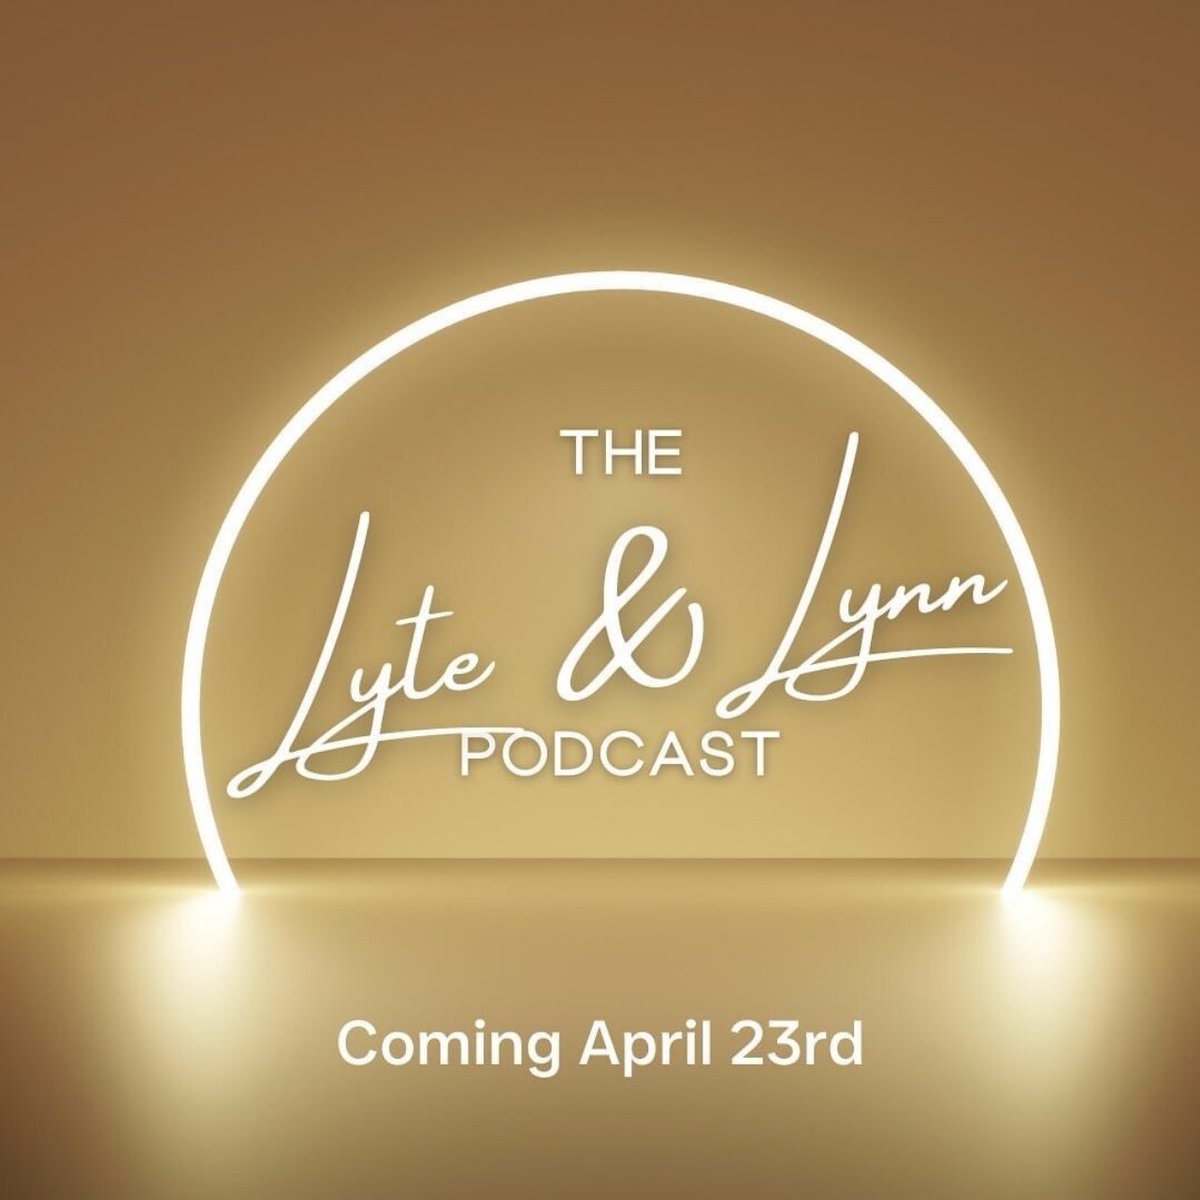 Are you ready? @mclyte and @lynnrichardson are excited to announce the start of their new show, The Lyte & Lynn Podcast on April 23rd!✨ Stay up to date by subscribing to Dr. Lynn's YouTube channel: Lynn Richardson📺